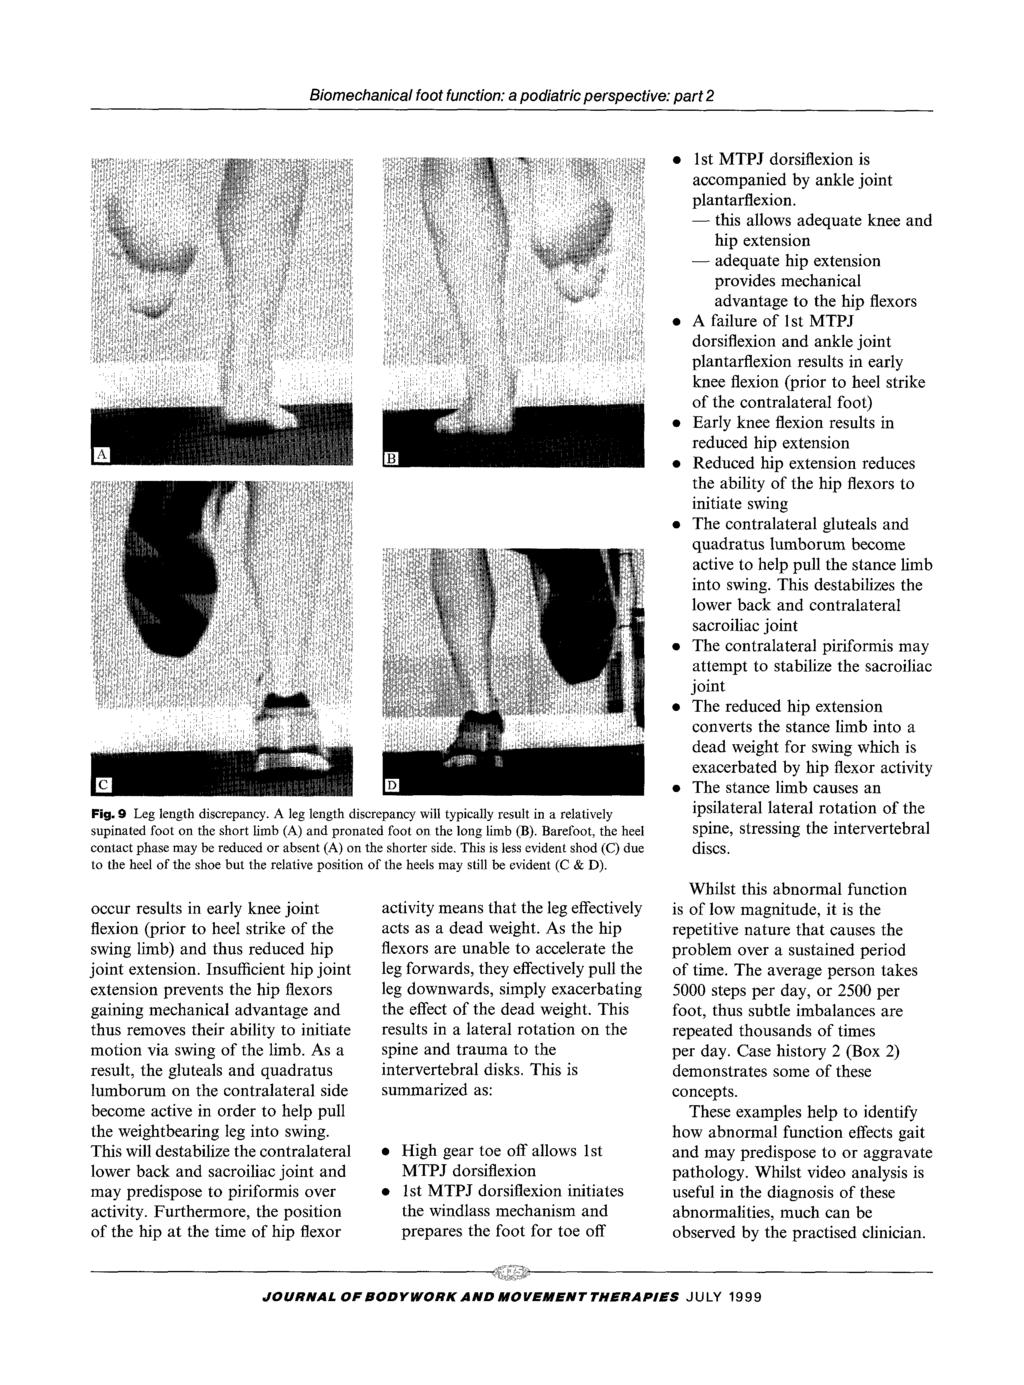 - - this - - adequate Biomechanical foot function: a podiatric perspective: part 2 Fig. 9 Leg length discrepancy.